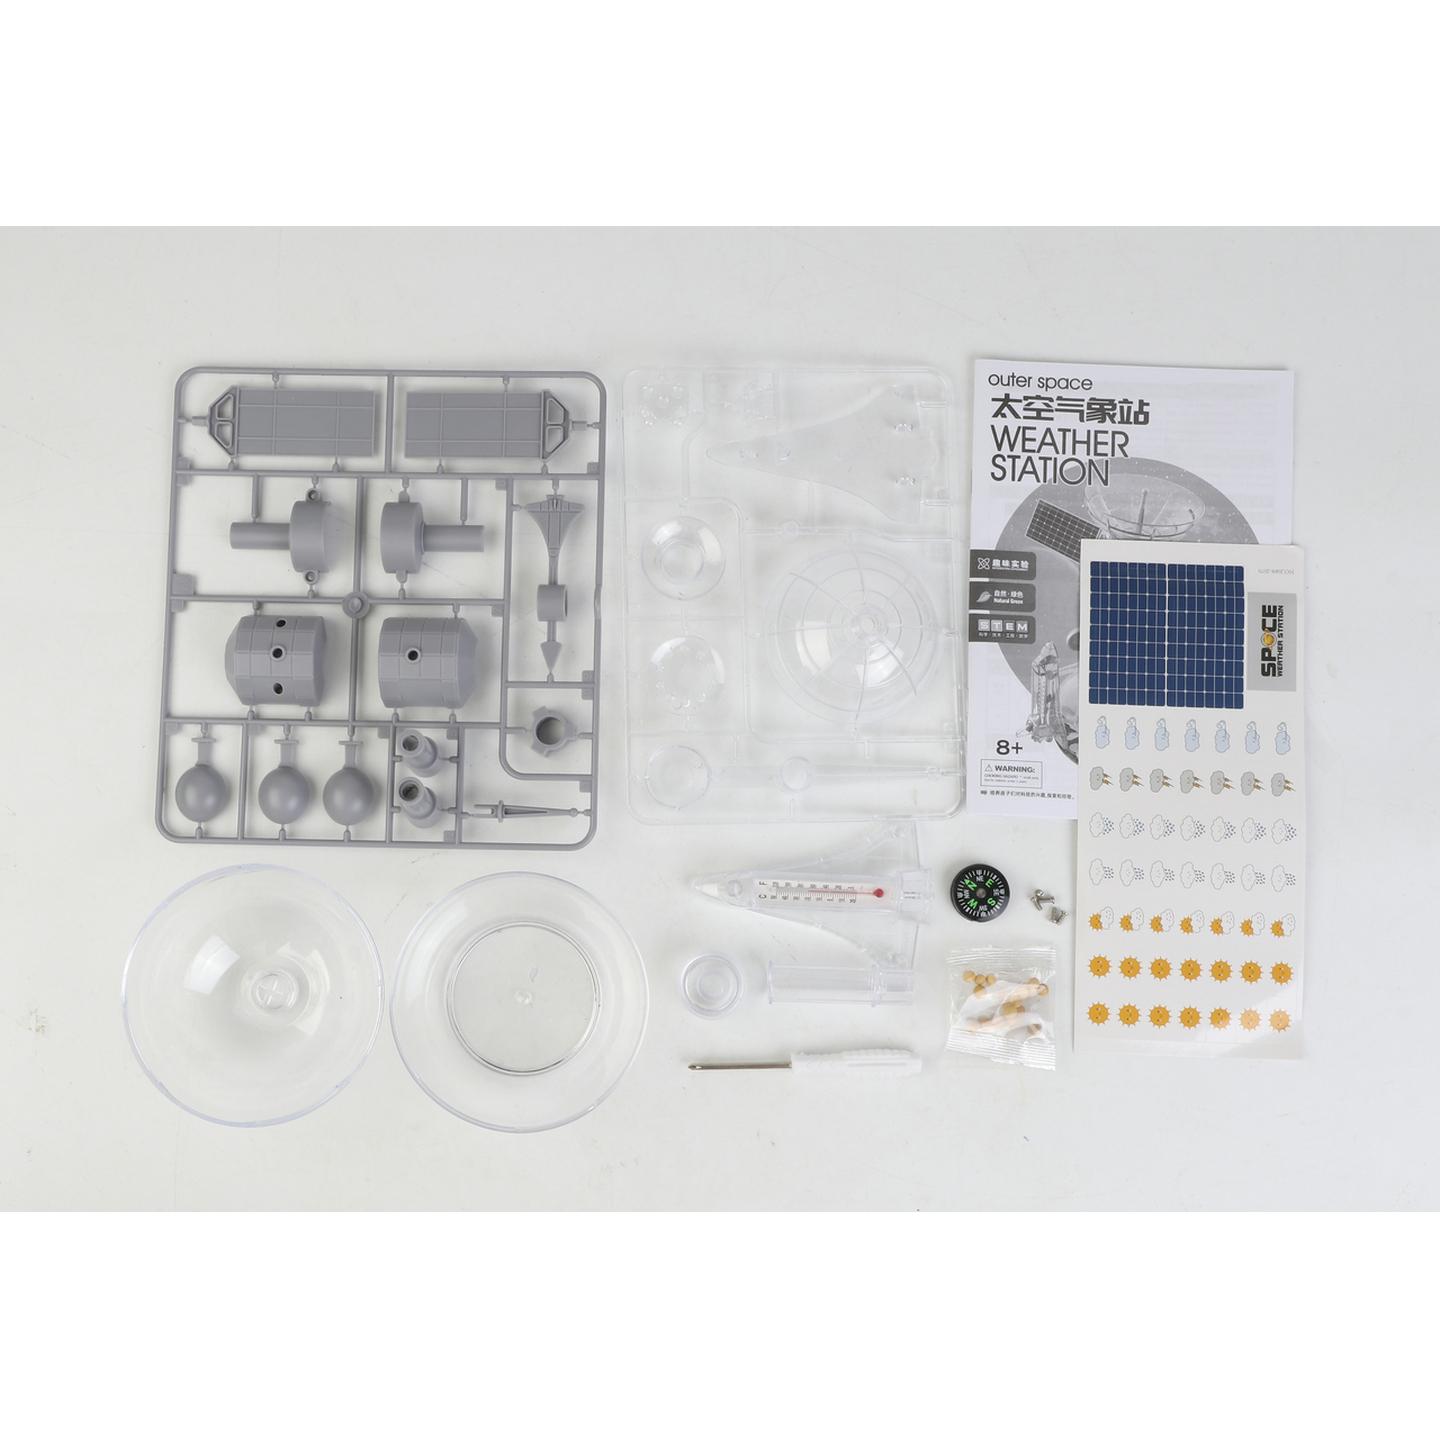 The Outer Space Weather Station Kit